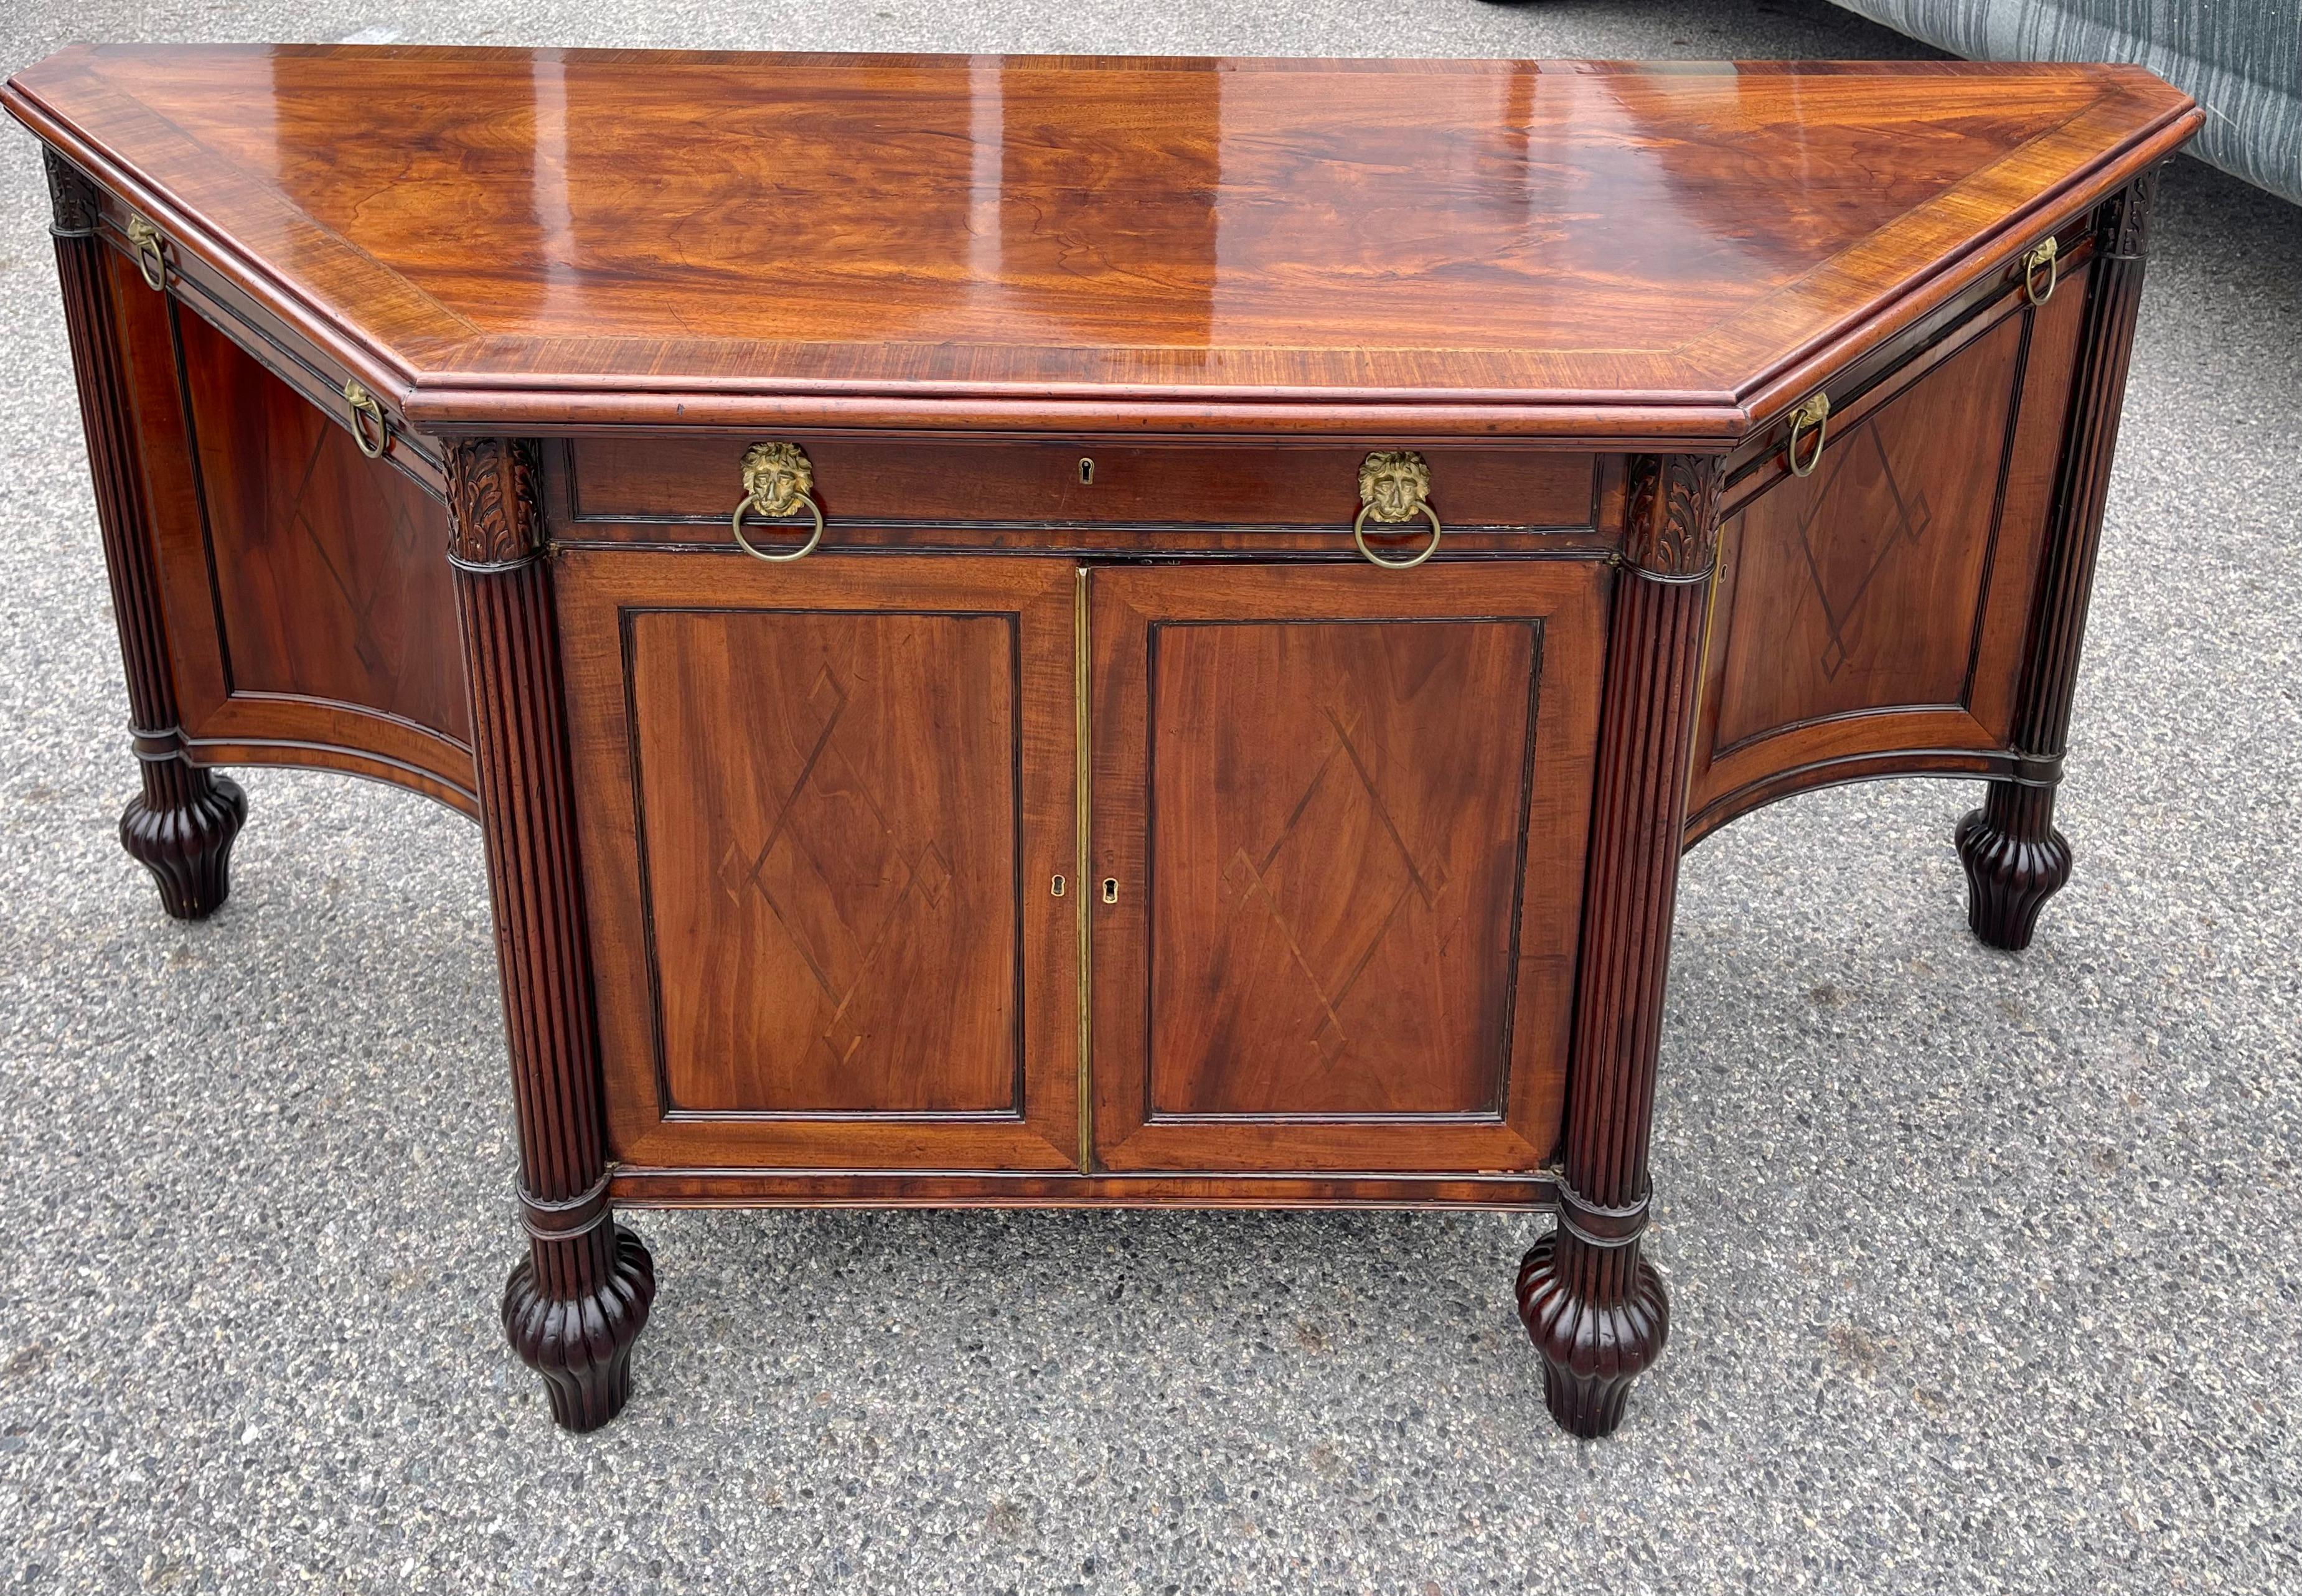 Pair of Early 19th Century Regency Mahogany Sideboard Cabinets In Good Condition For Sale In Essex, MA